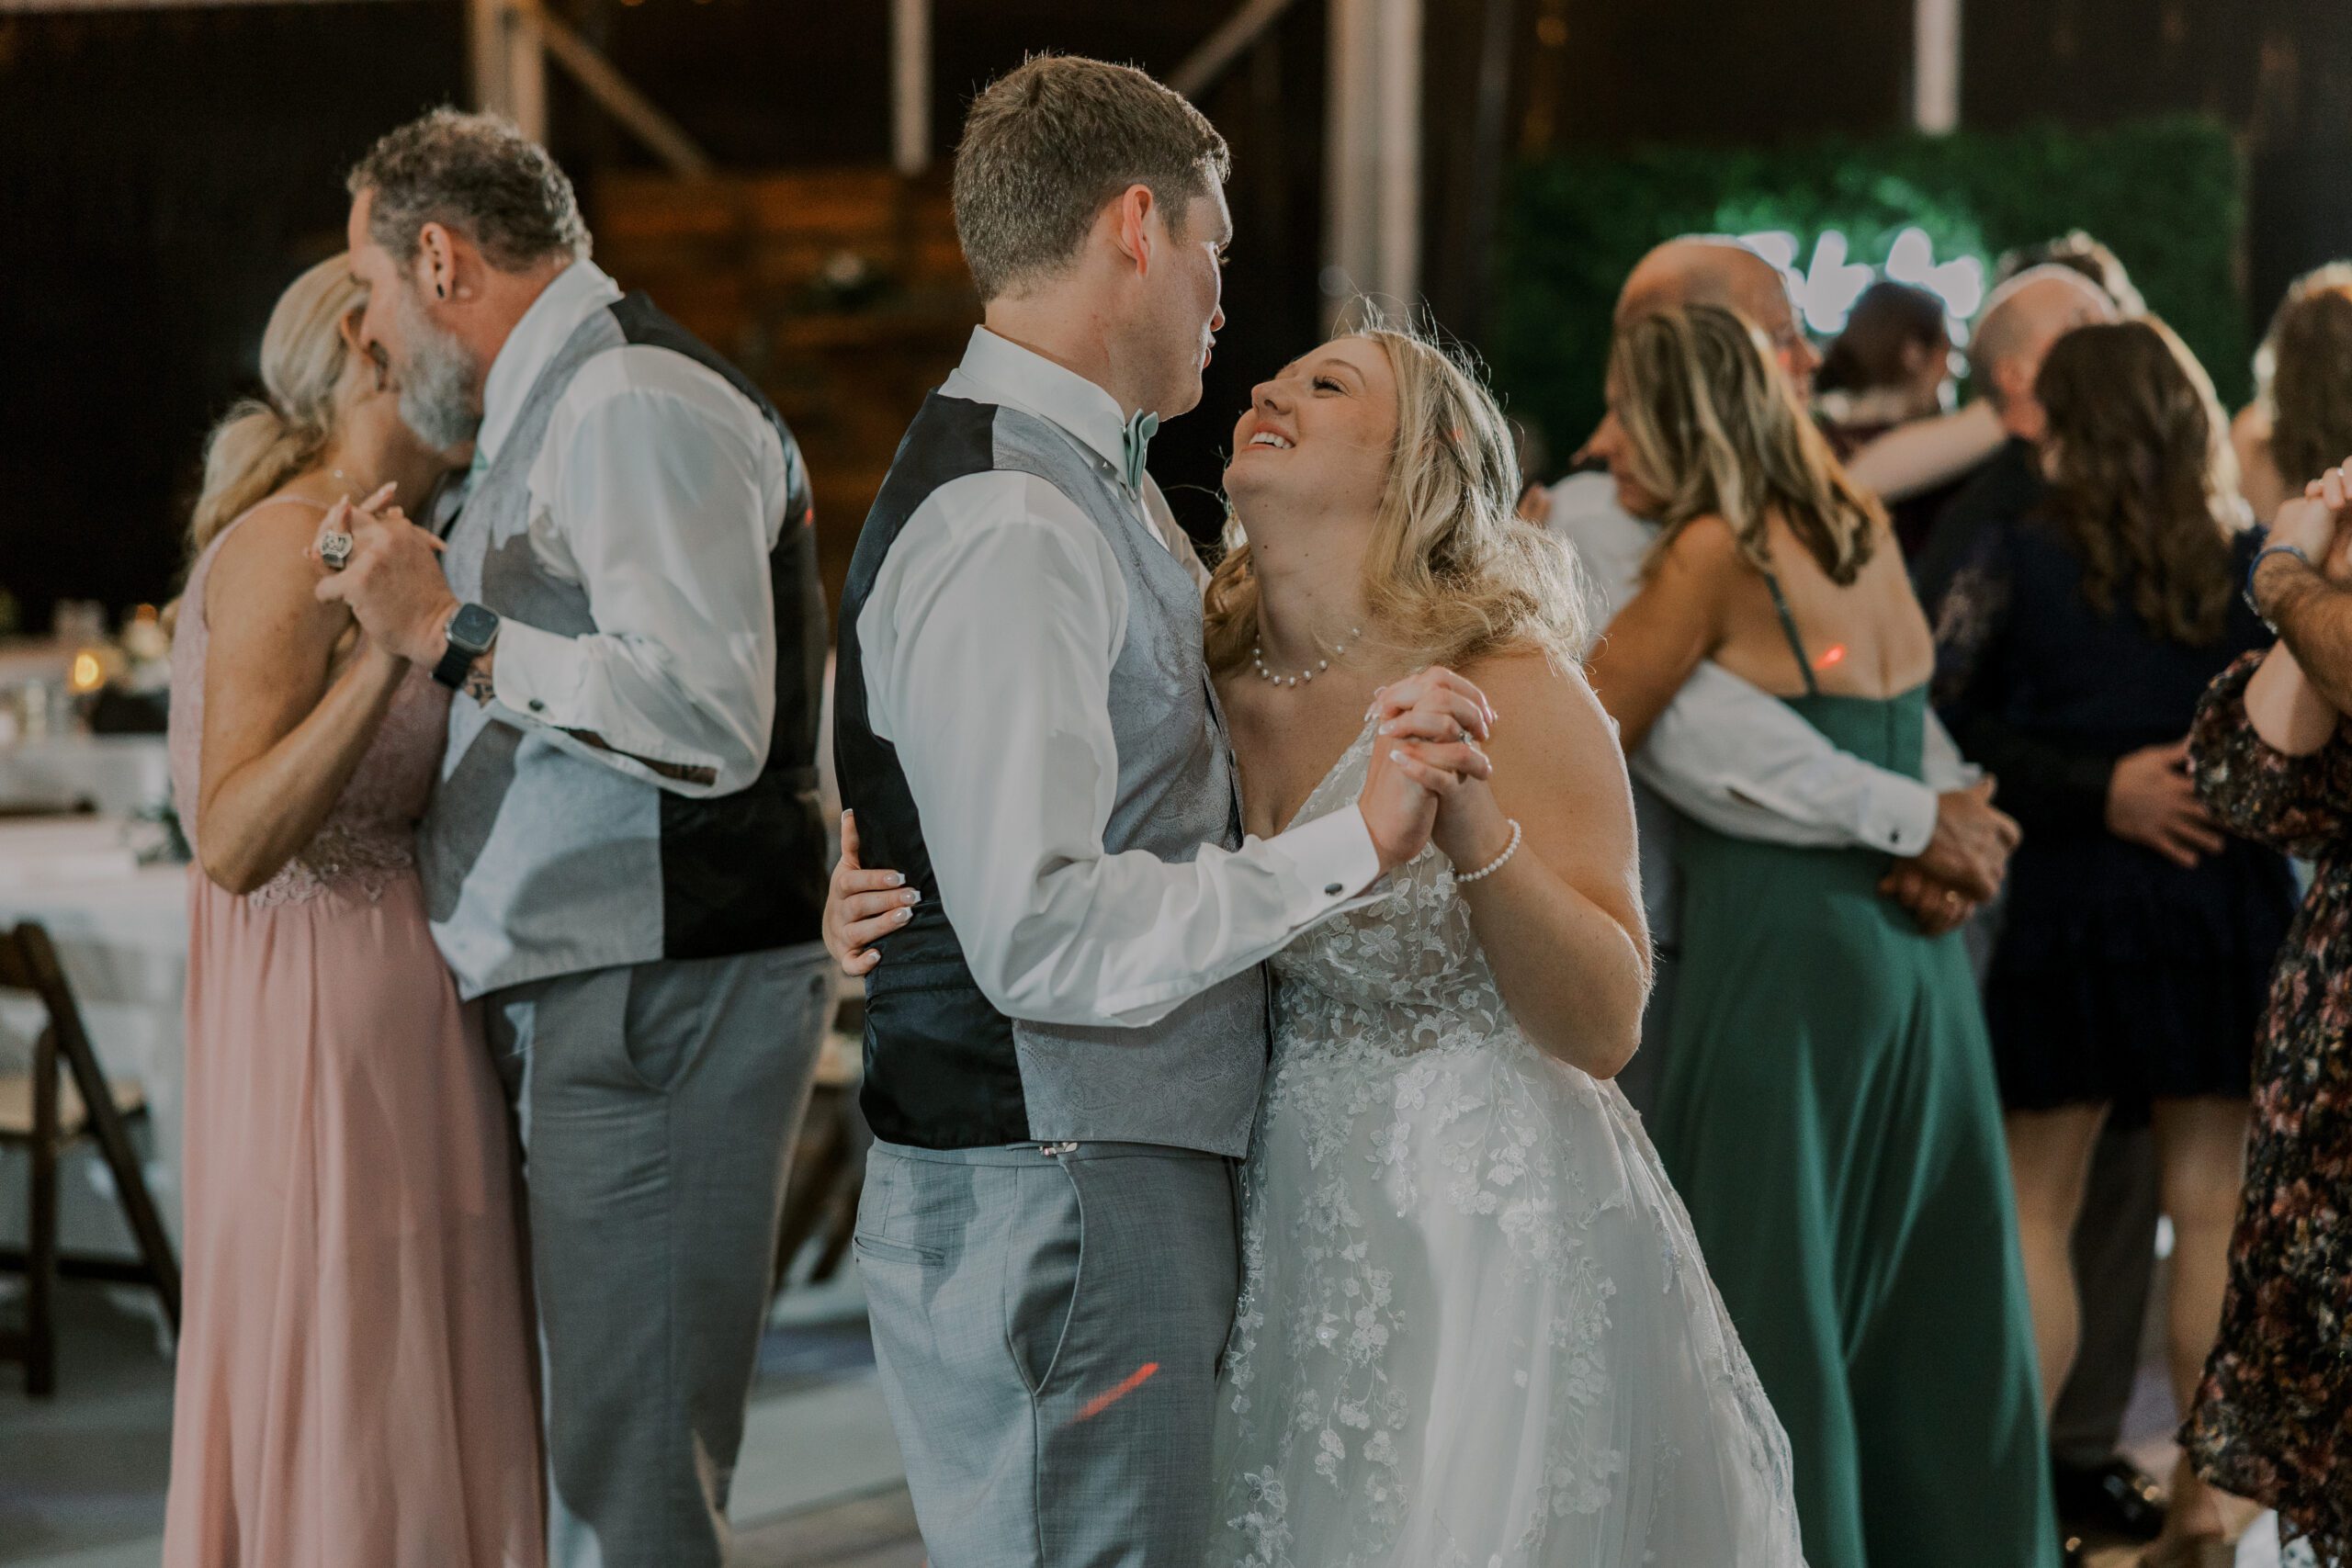 Bride and groom slow dancing alongside other couples on the dance floor at their arbor haven wedding